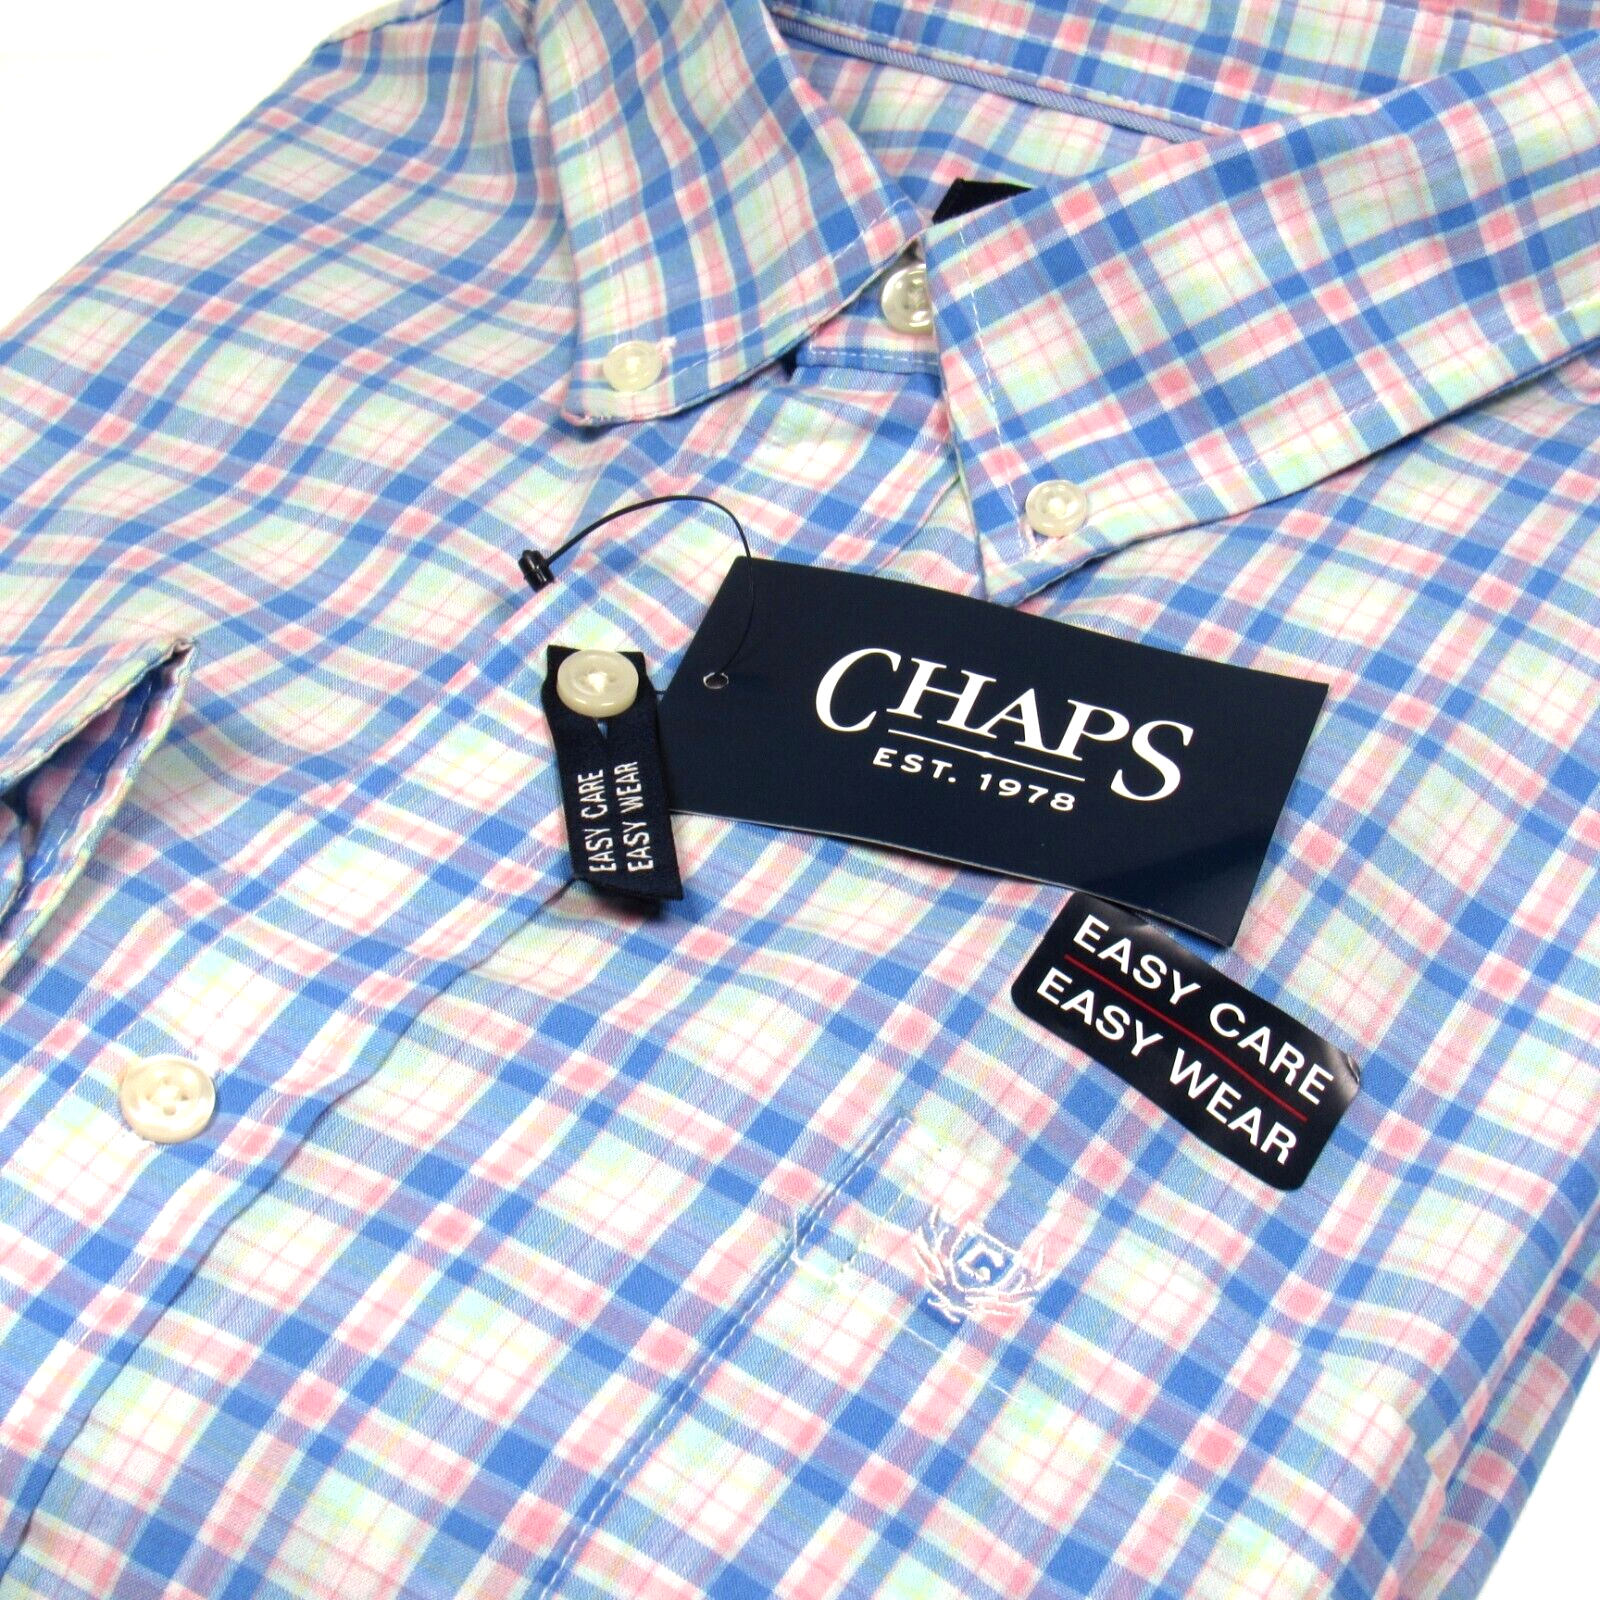 Primary image for Chaps Men's L/S Check Plaid Shirt Easy Care Marina Blue Multi Size XL